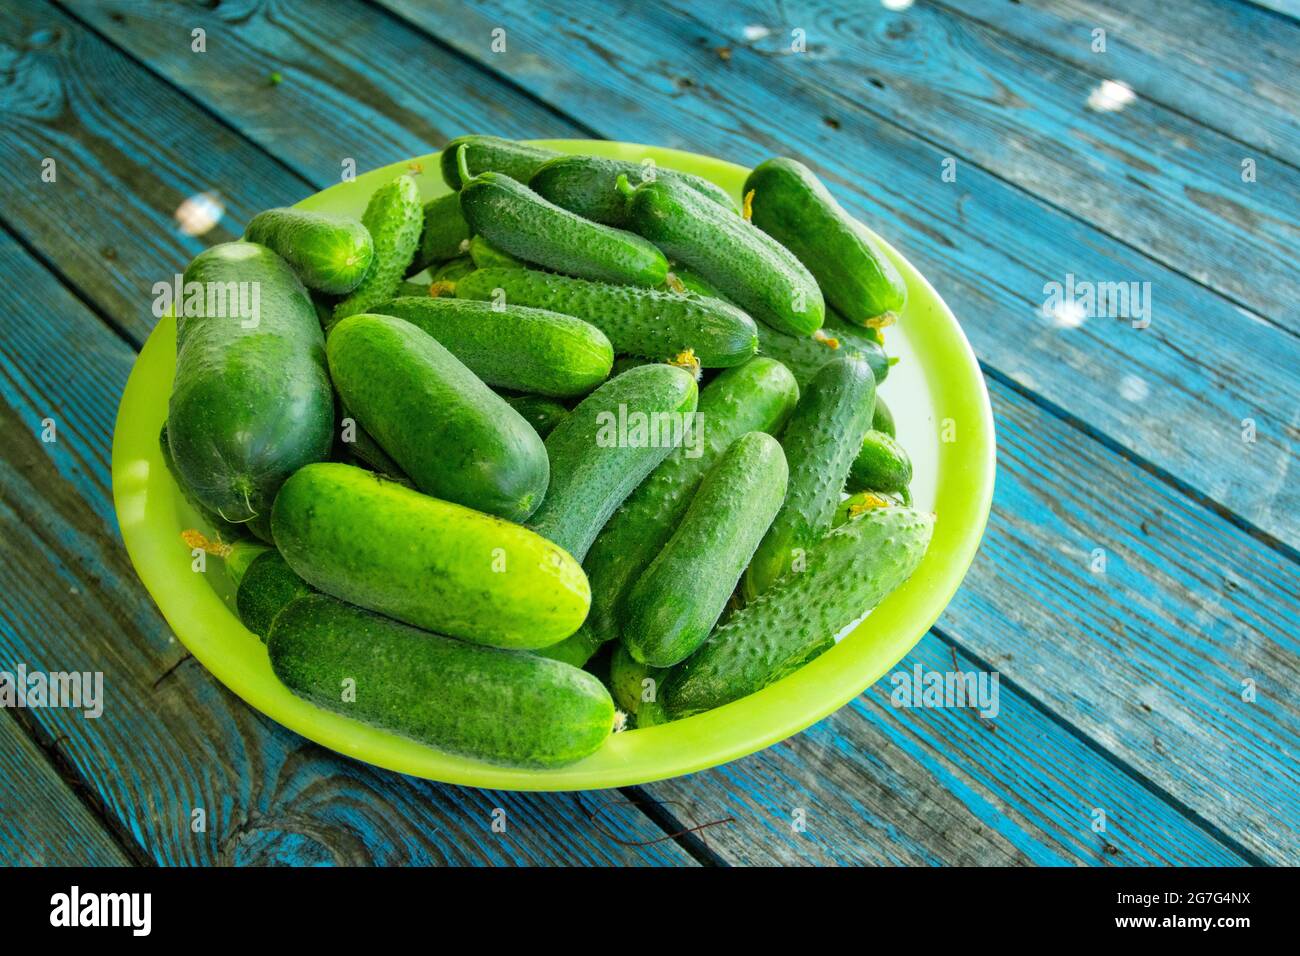 Juicy fresh cucumbers in a bowl on a table made of old painted boards Stock Photo